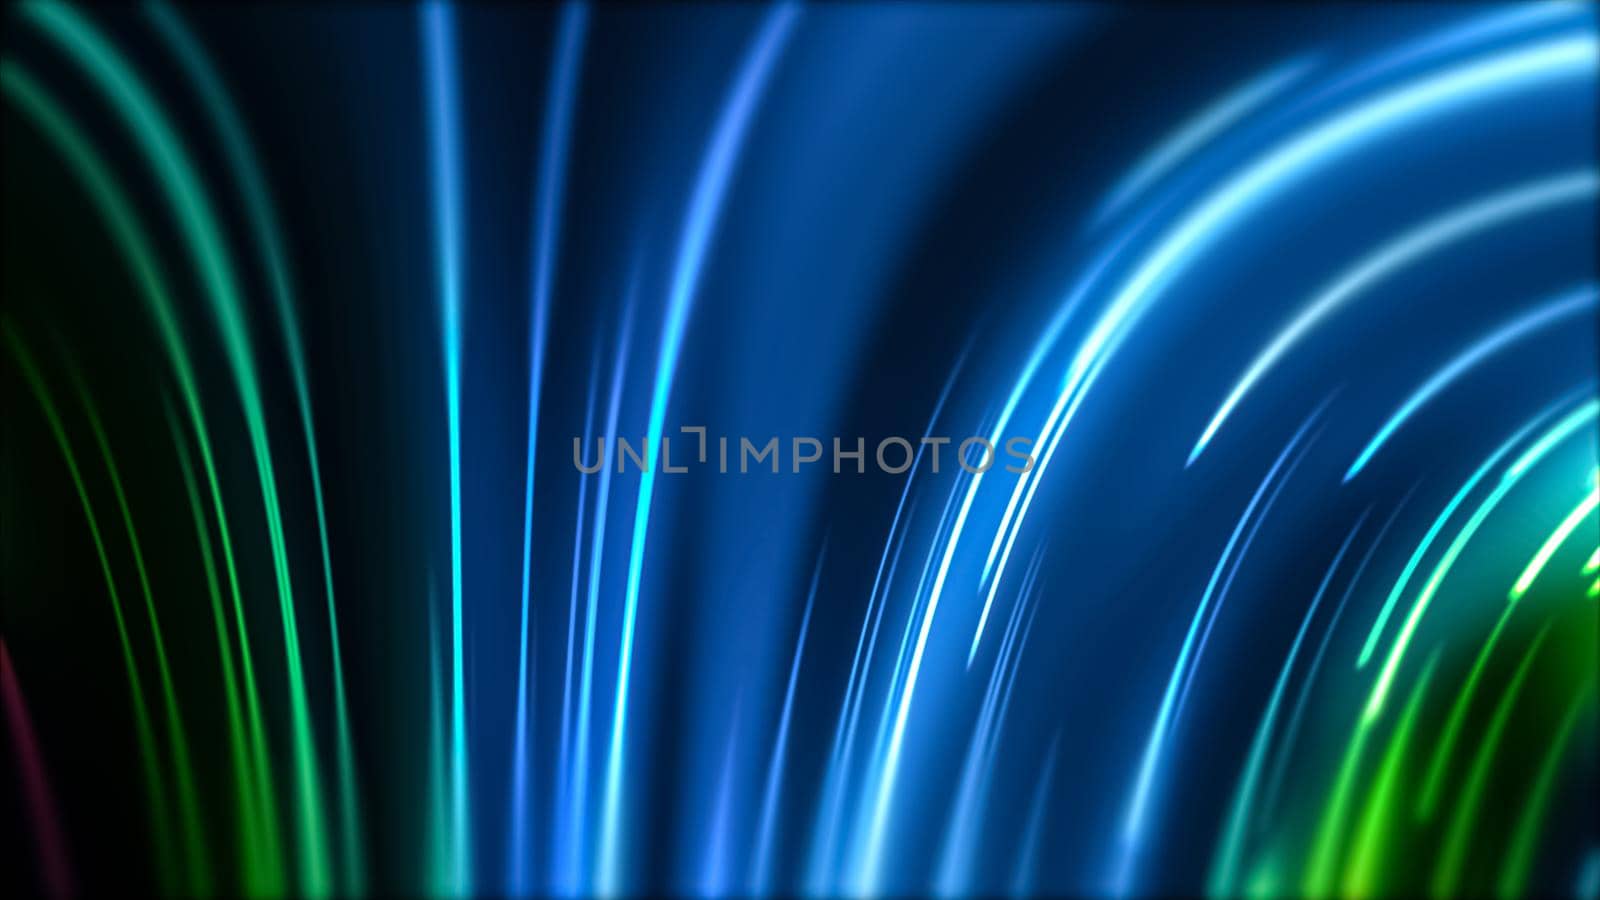 Glowing lines, blue violet neon lights, laser show, night club, equalizer, abstract fluorescent background, optical illusion, virtual reality